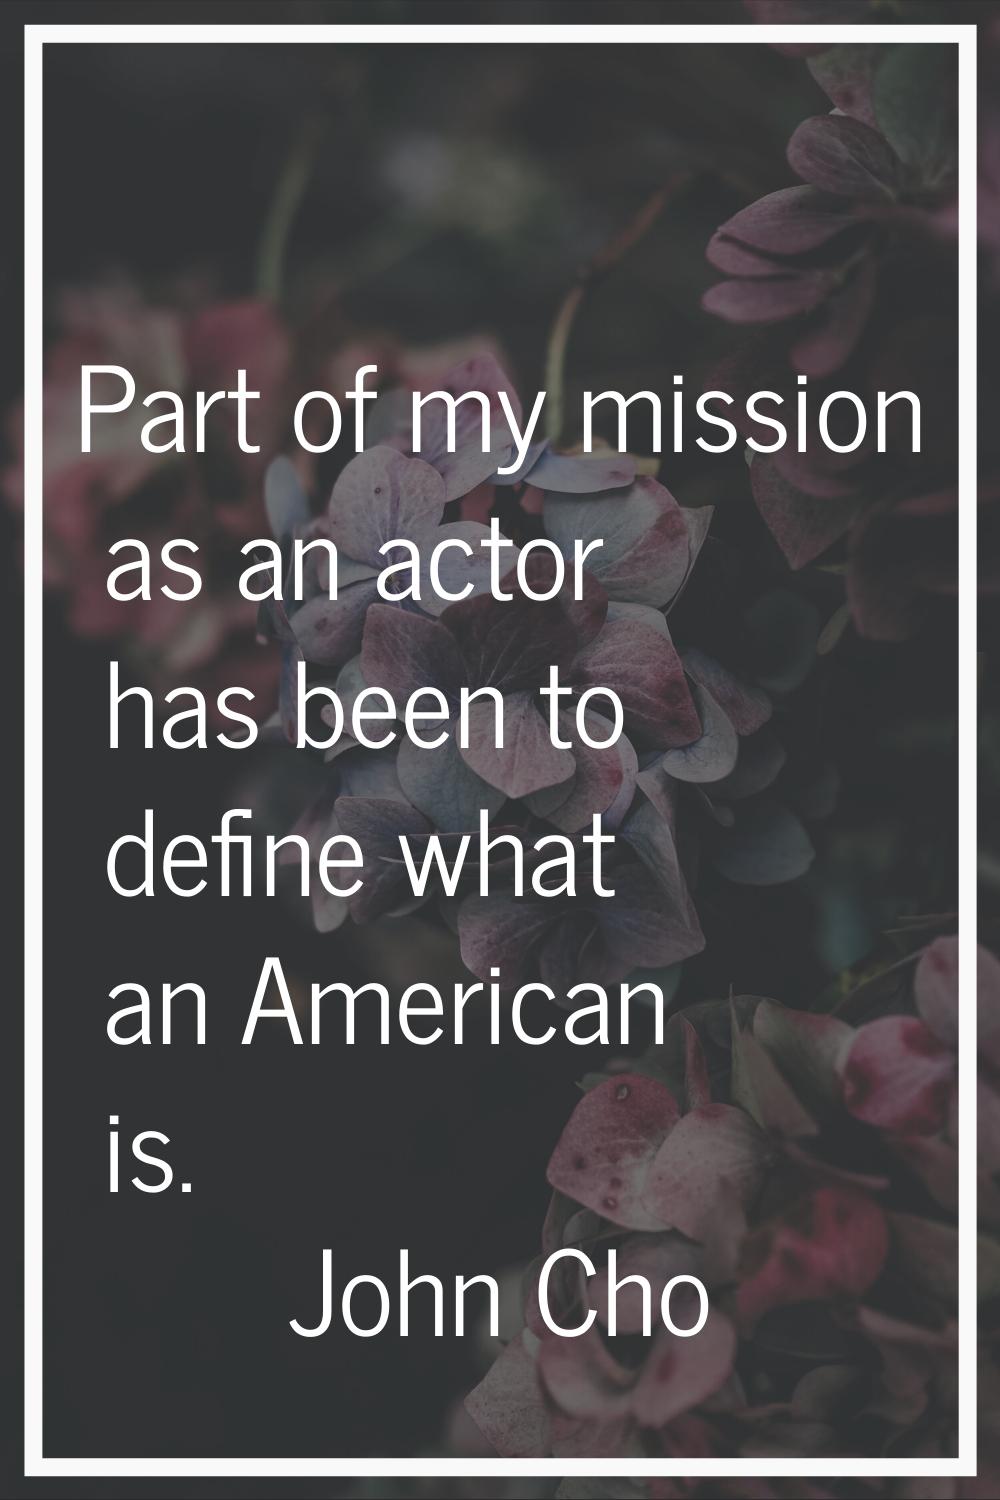 Part of my mission as an actor has been to define what an American is.